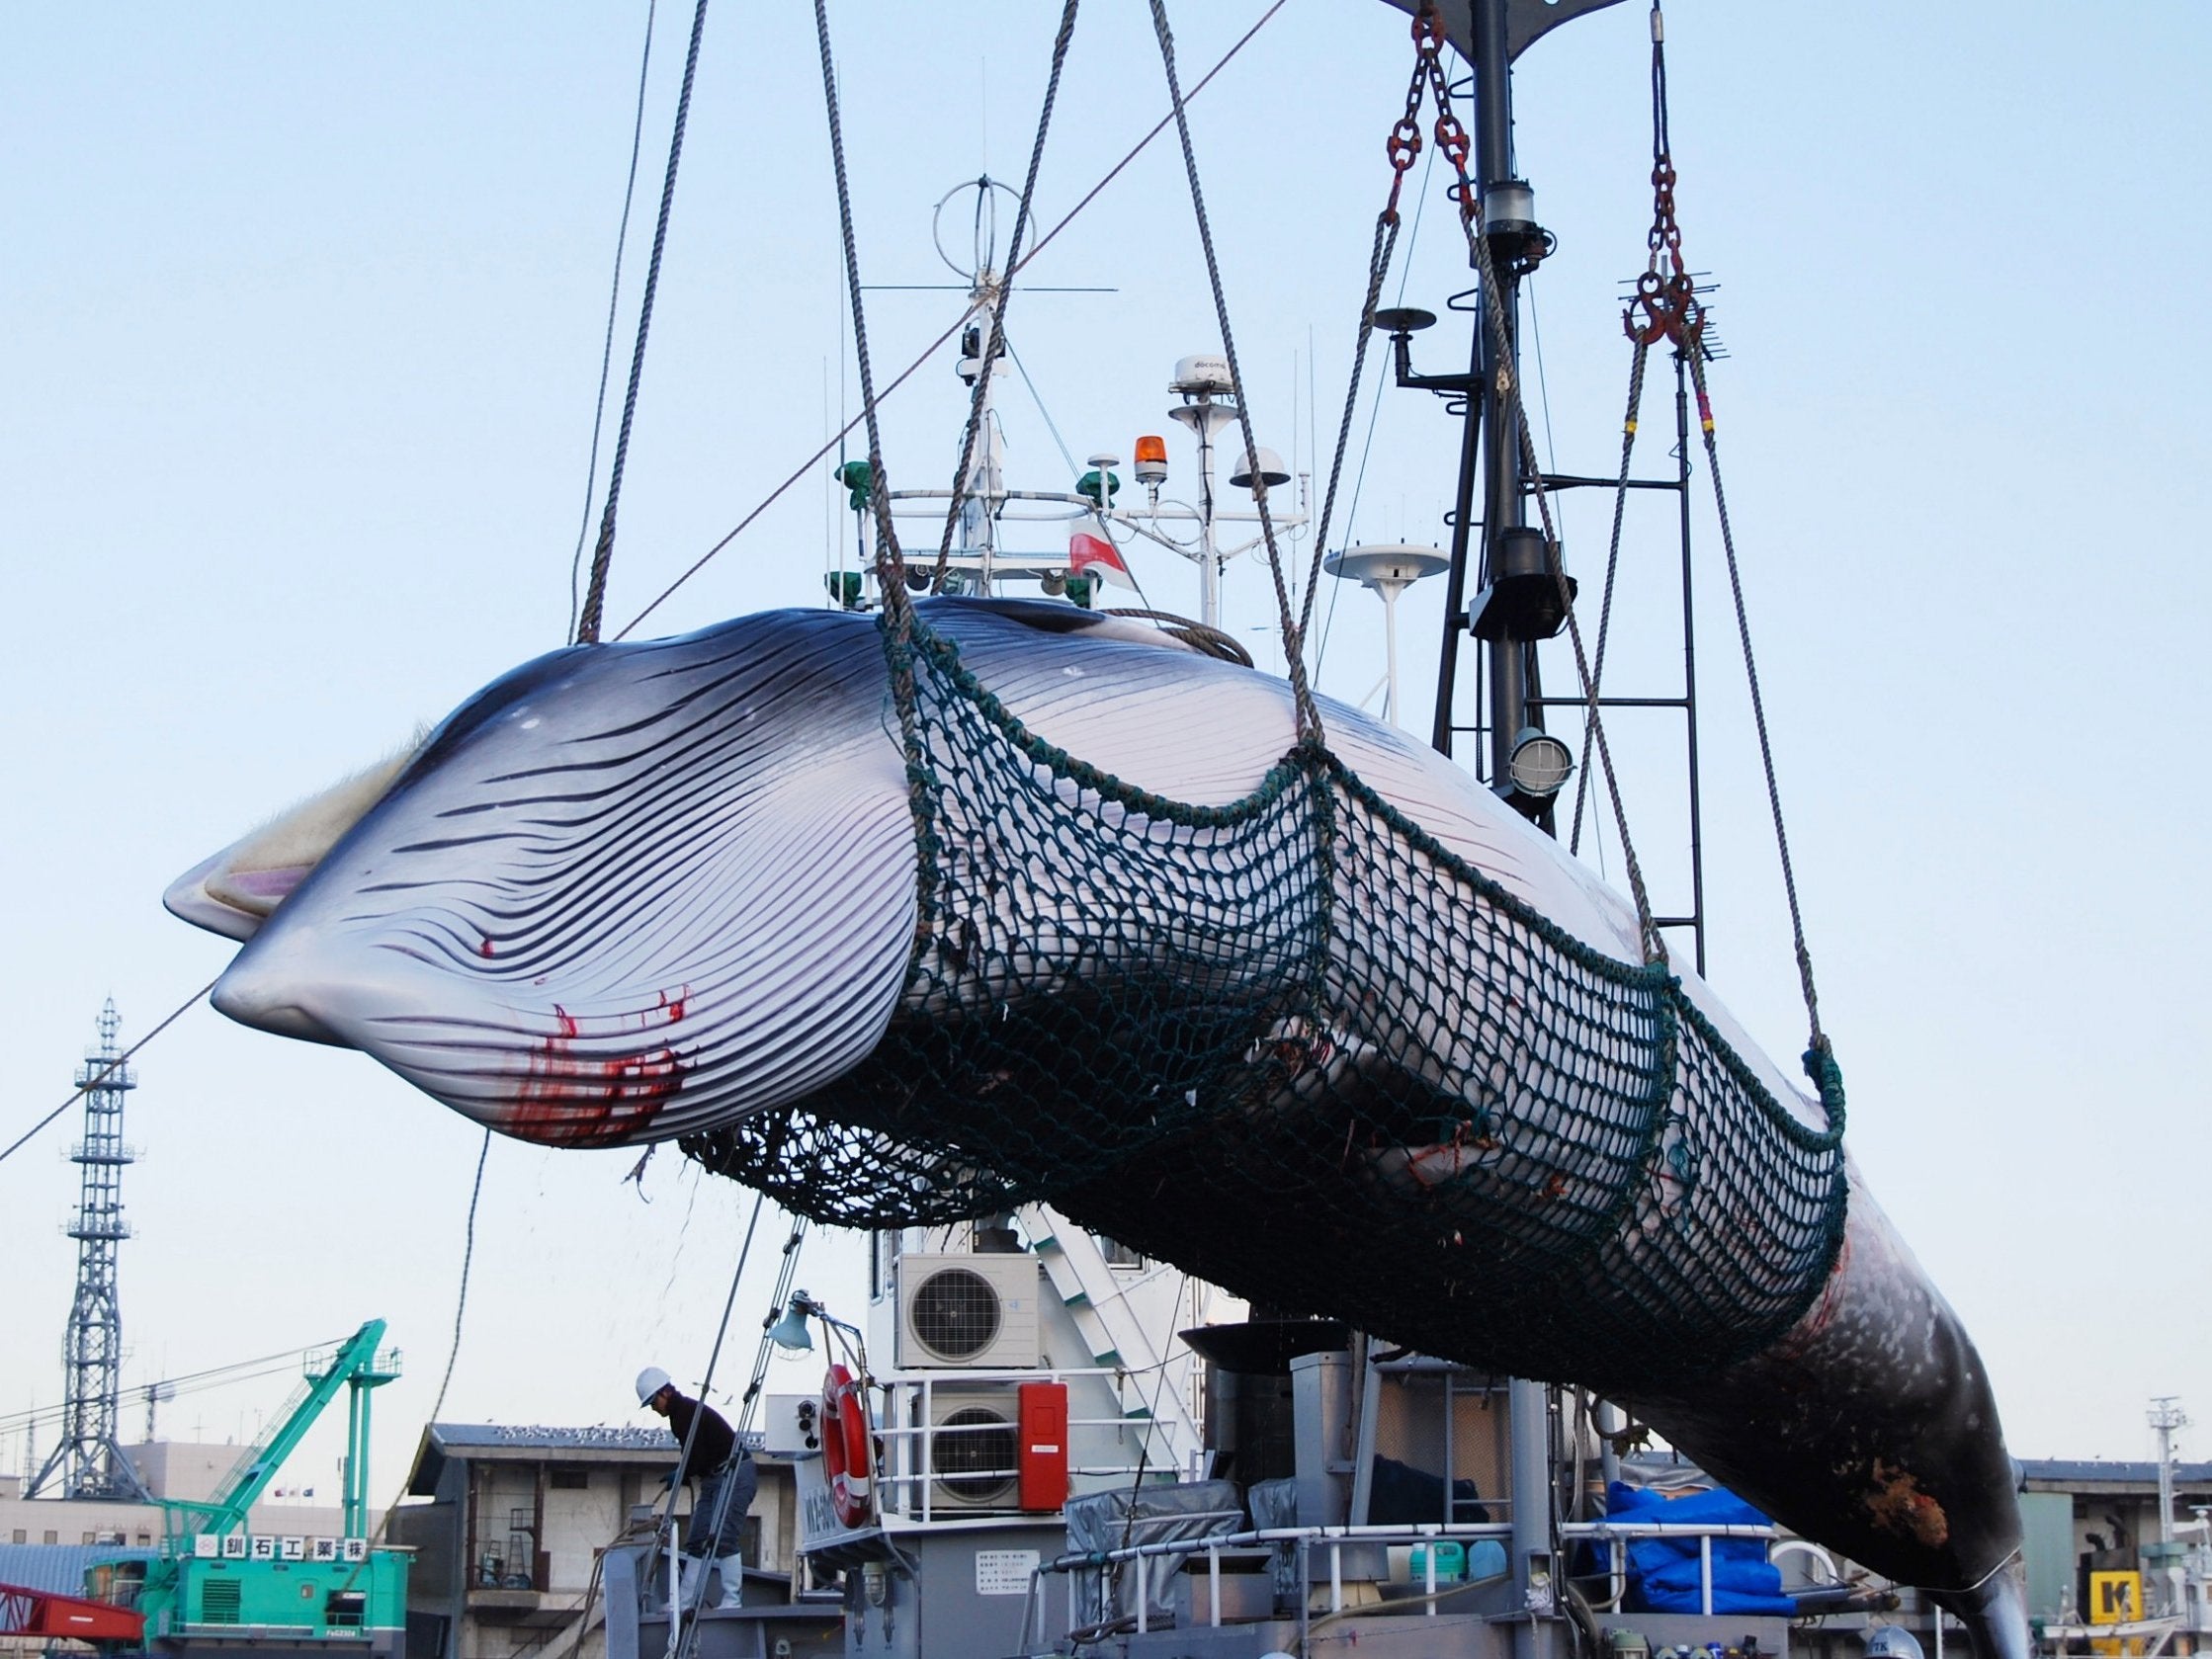 Minke whales are among the species Japan's fleets intend to hunt when commercial whaling resumes in July